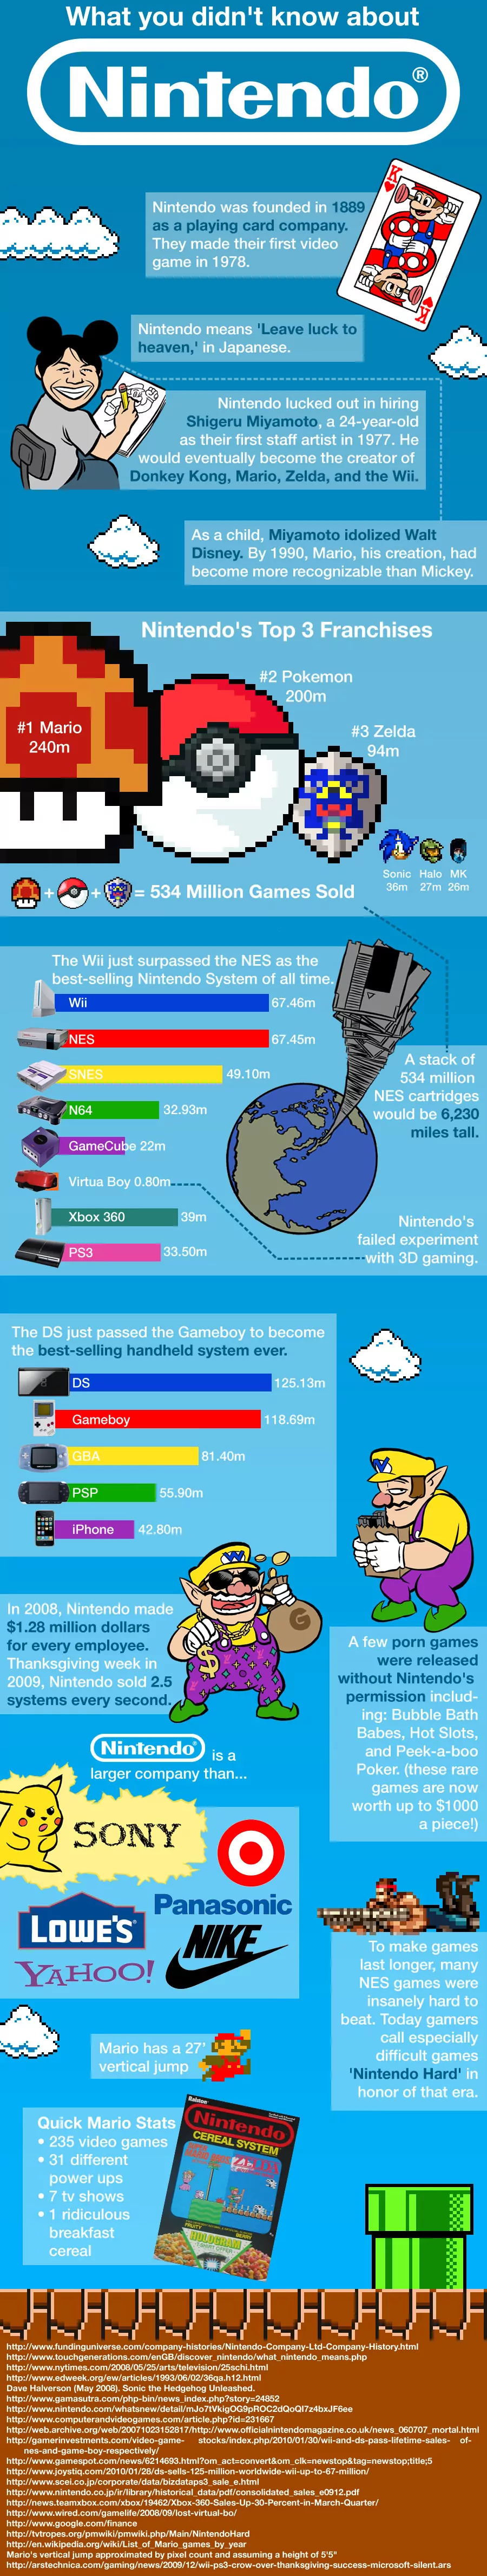 What You Know About Nintendo InfoGraphic - The Fact Site